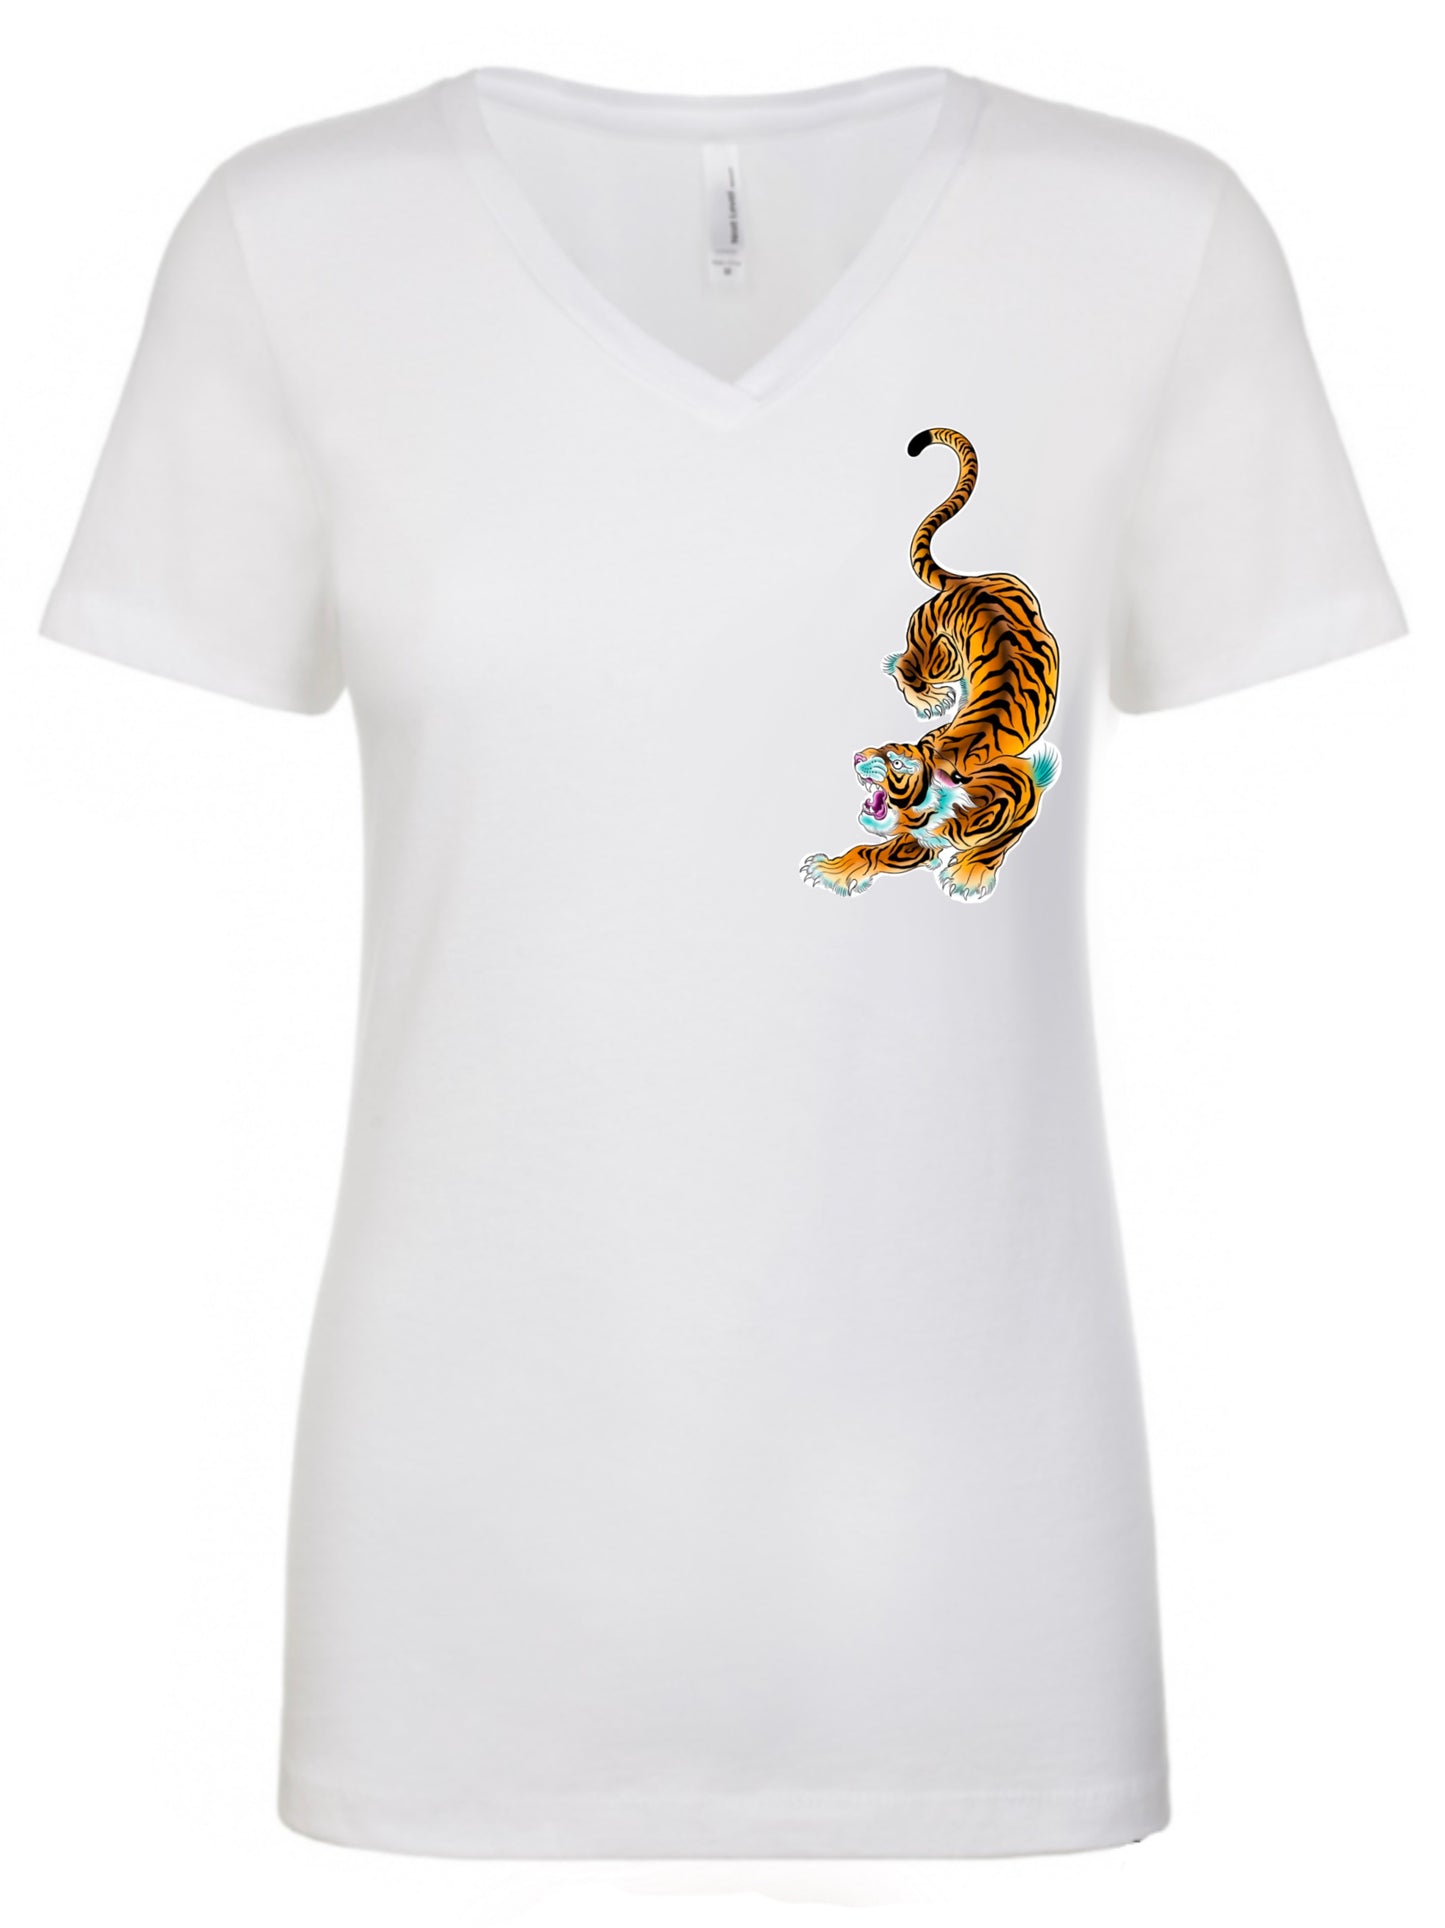 Eastie Tiger Woman’s Fitted Tee